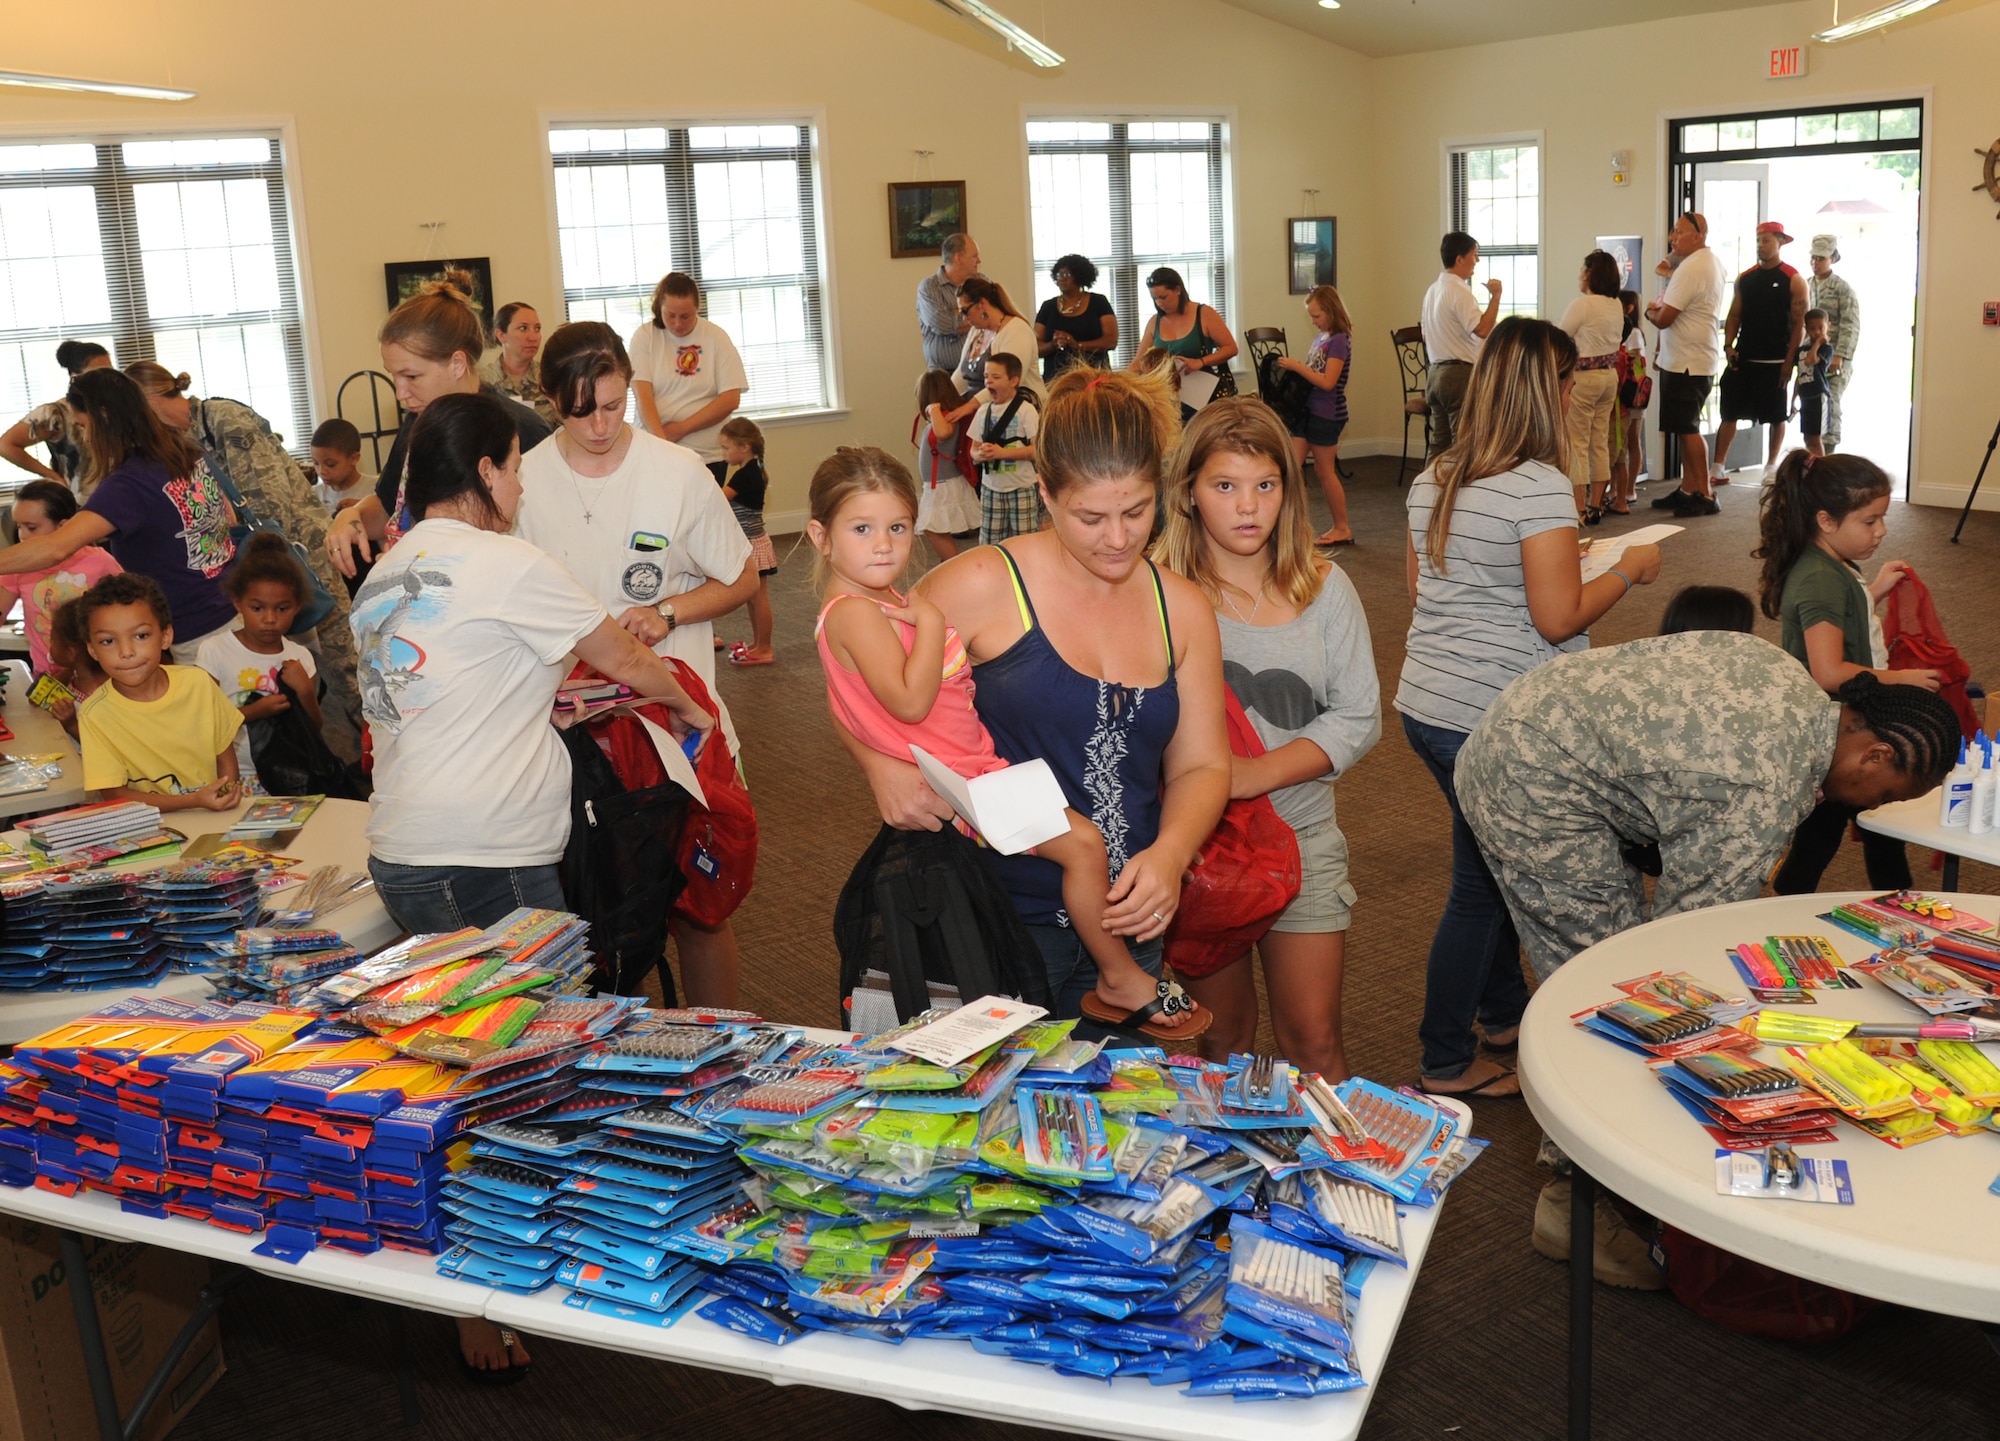 Military families take advantage of a backpack and school supplies give-away event July 29, 2014, at the Bay Ridge Community Center, Keesler Air Force Base, Miss.  The 81st Force Support Squadron and Operation Home Front partnered together to host the event for military families. (U.S. Air Force photo by Kemberly Groue)